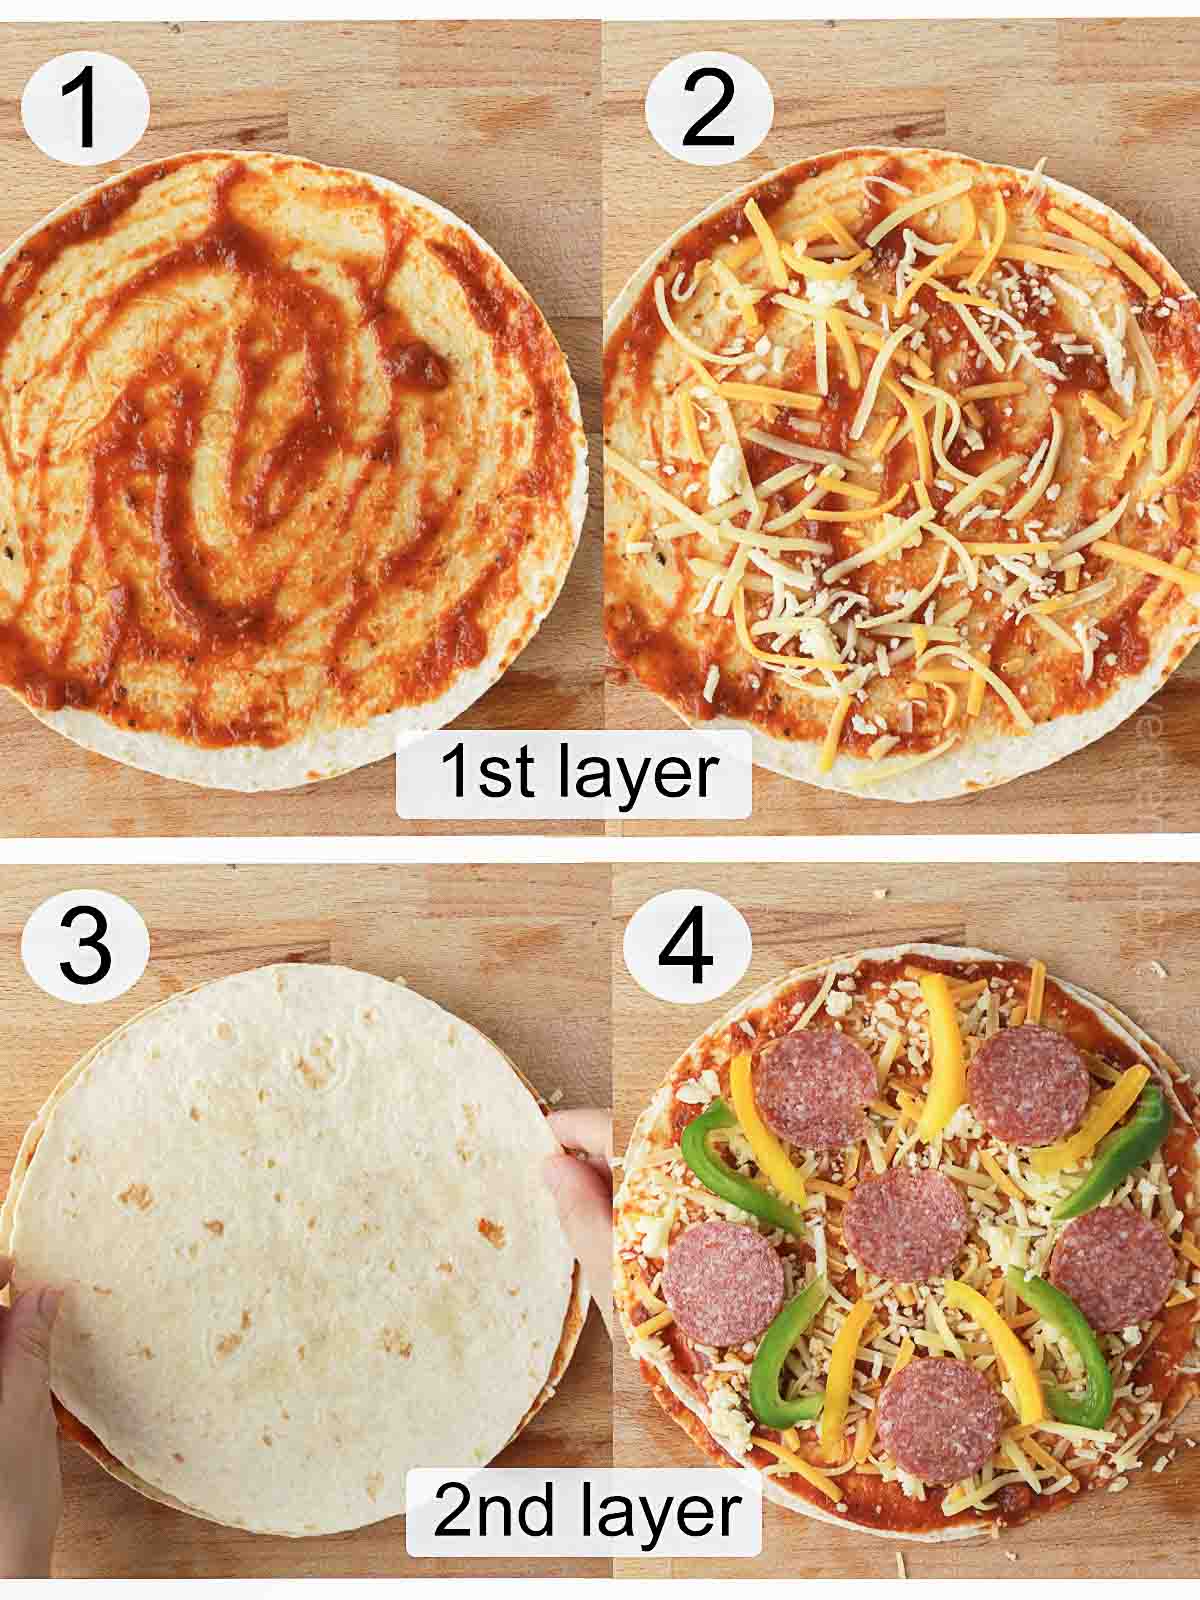 step-by-step process on how to prepare layers of tortilla pizza.